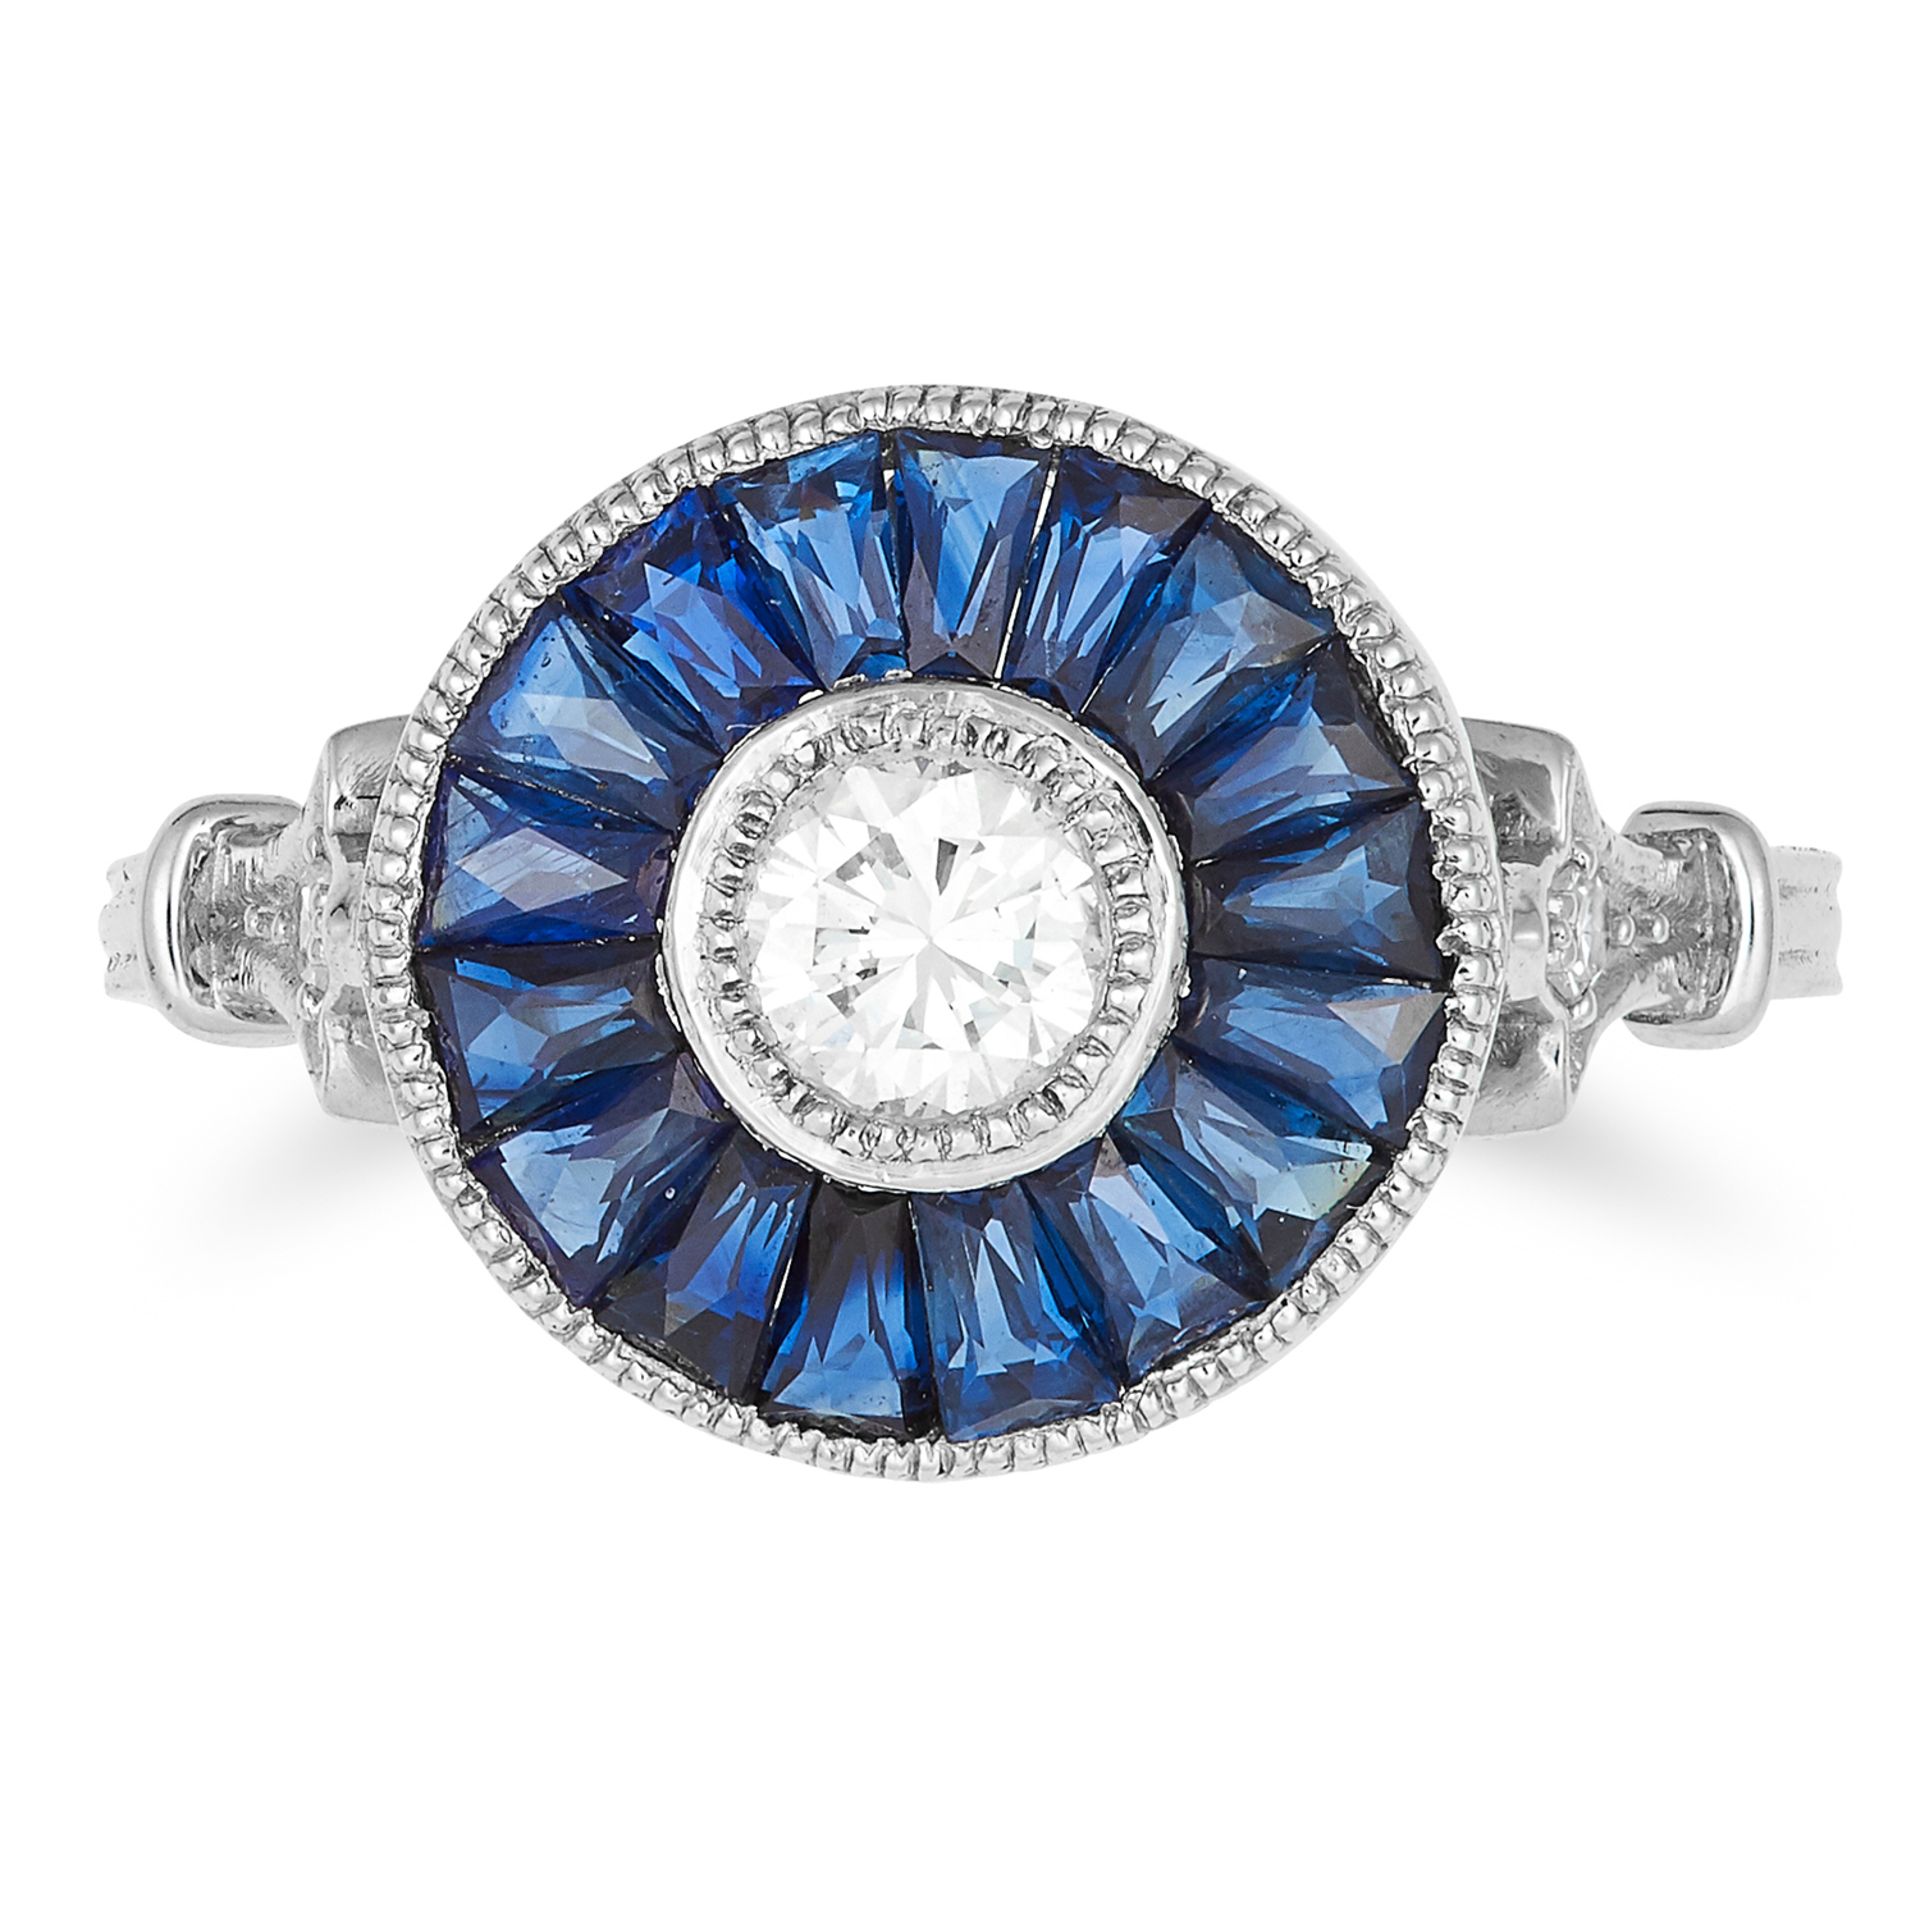 SAPPHIRE AND DIAMOND TARGET RING set with a round cut diamond in a border of calibre cut